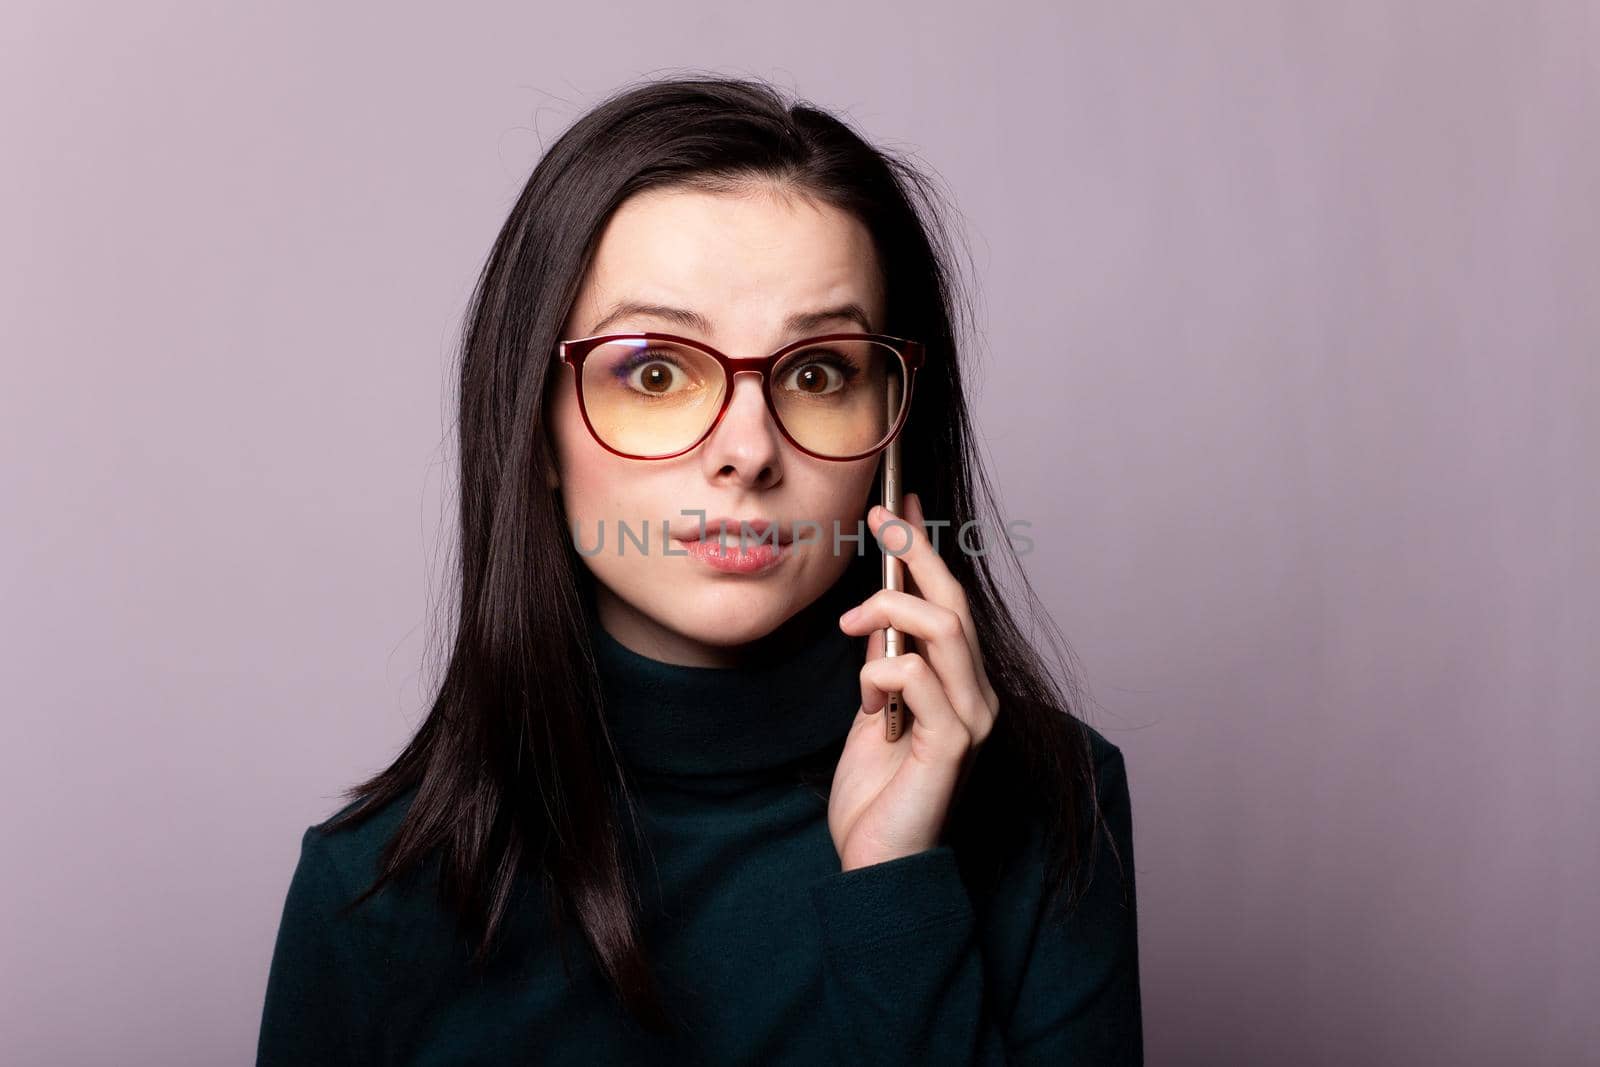 woman in a green turtleneck and glasses for sight communicates on the phone, portrait on a gray background by shilovskaya